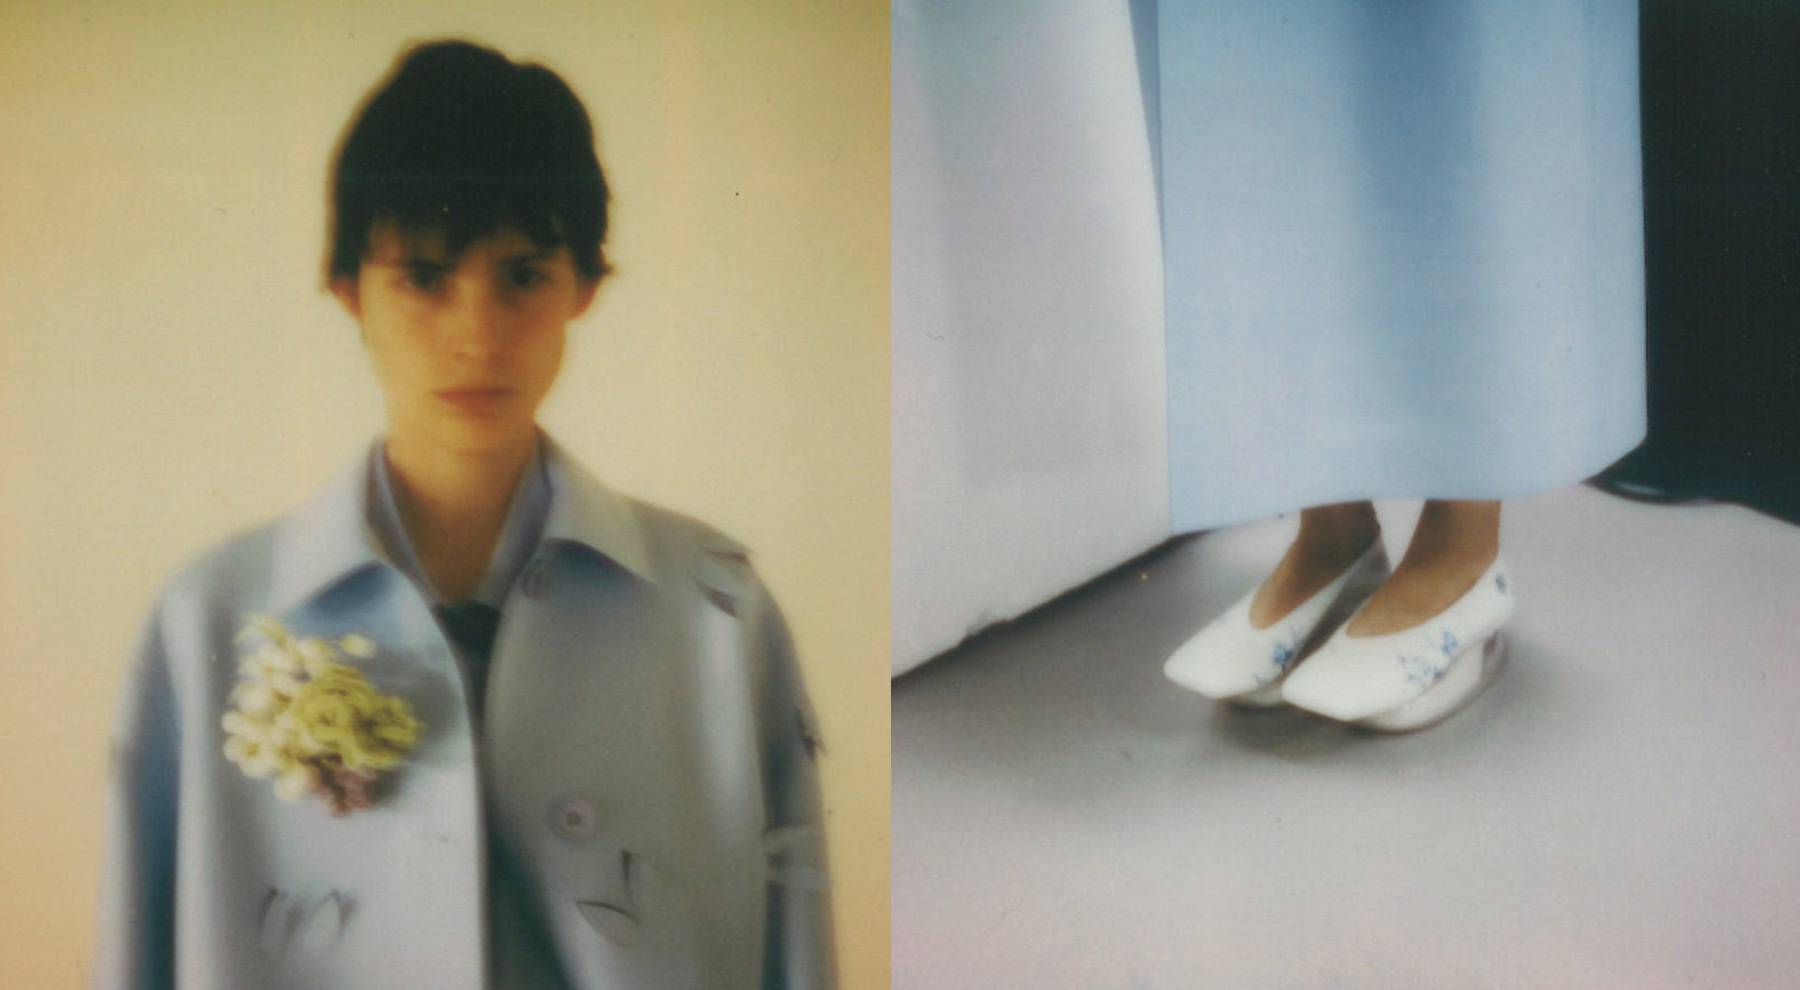 Yang Li shared preview polaroids of bubble flats and a laser-cut trench-coat from his Shang Xia collection set to be revealed Thursday morning.